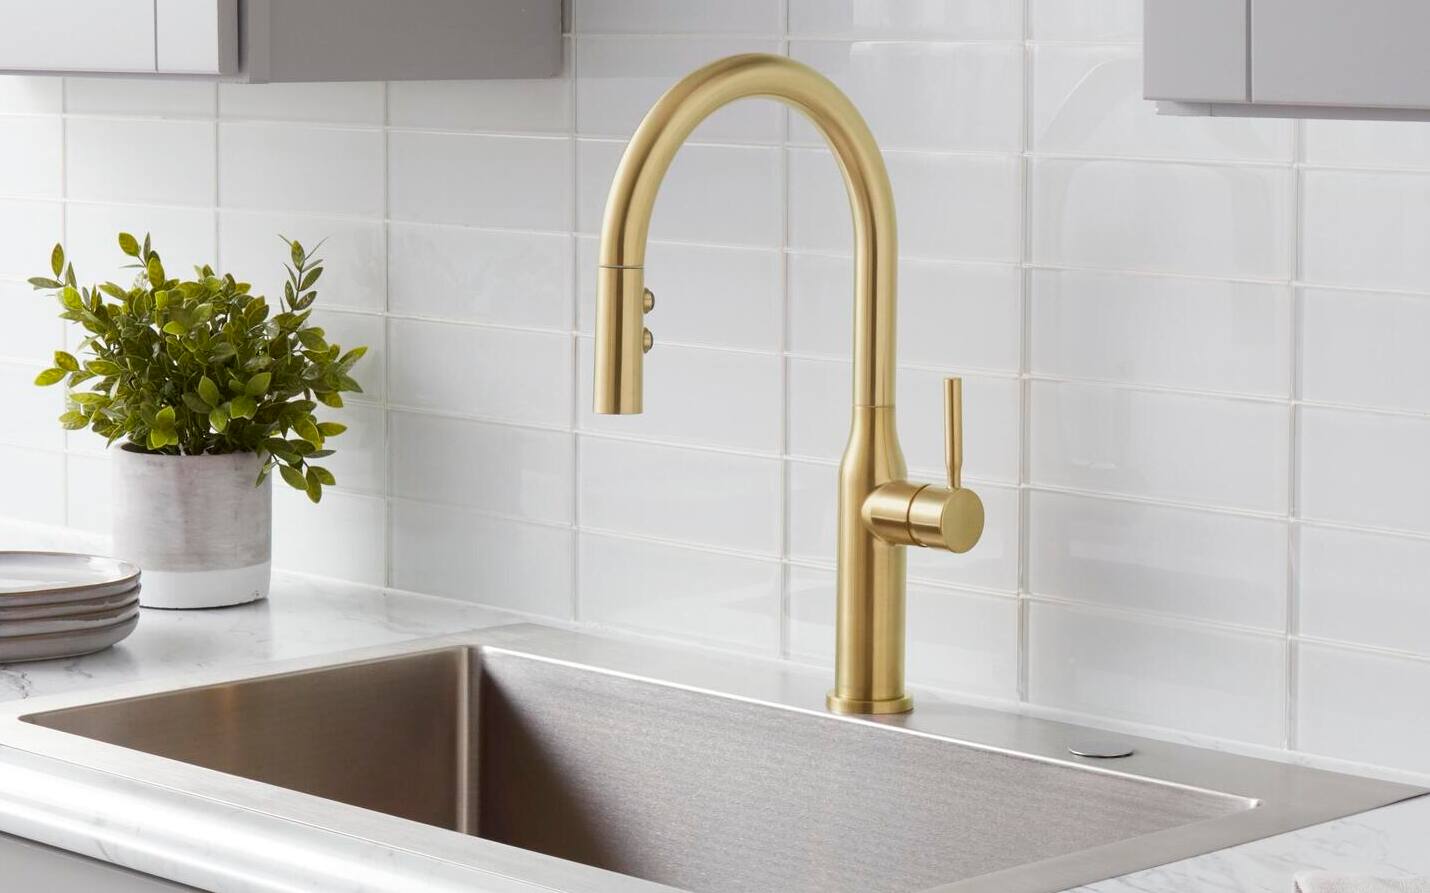 Water Delivery Choices for the Home - Kitchen & Bath Design News